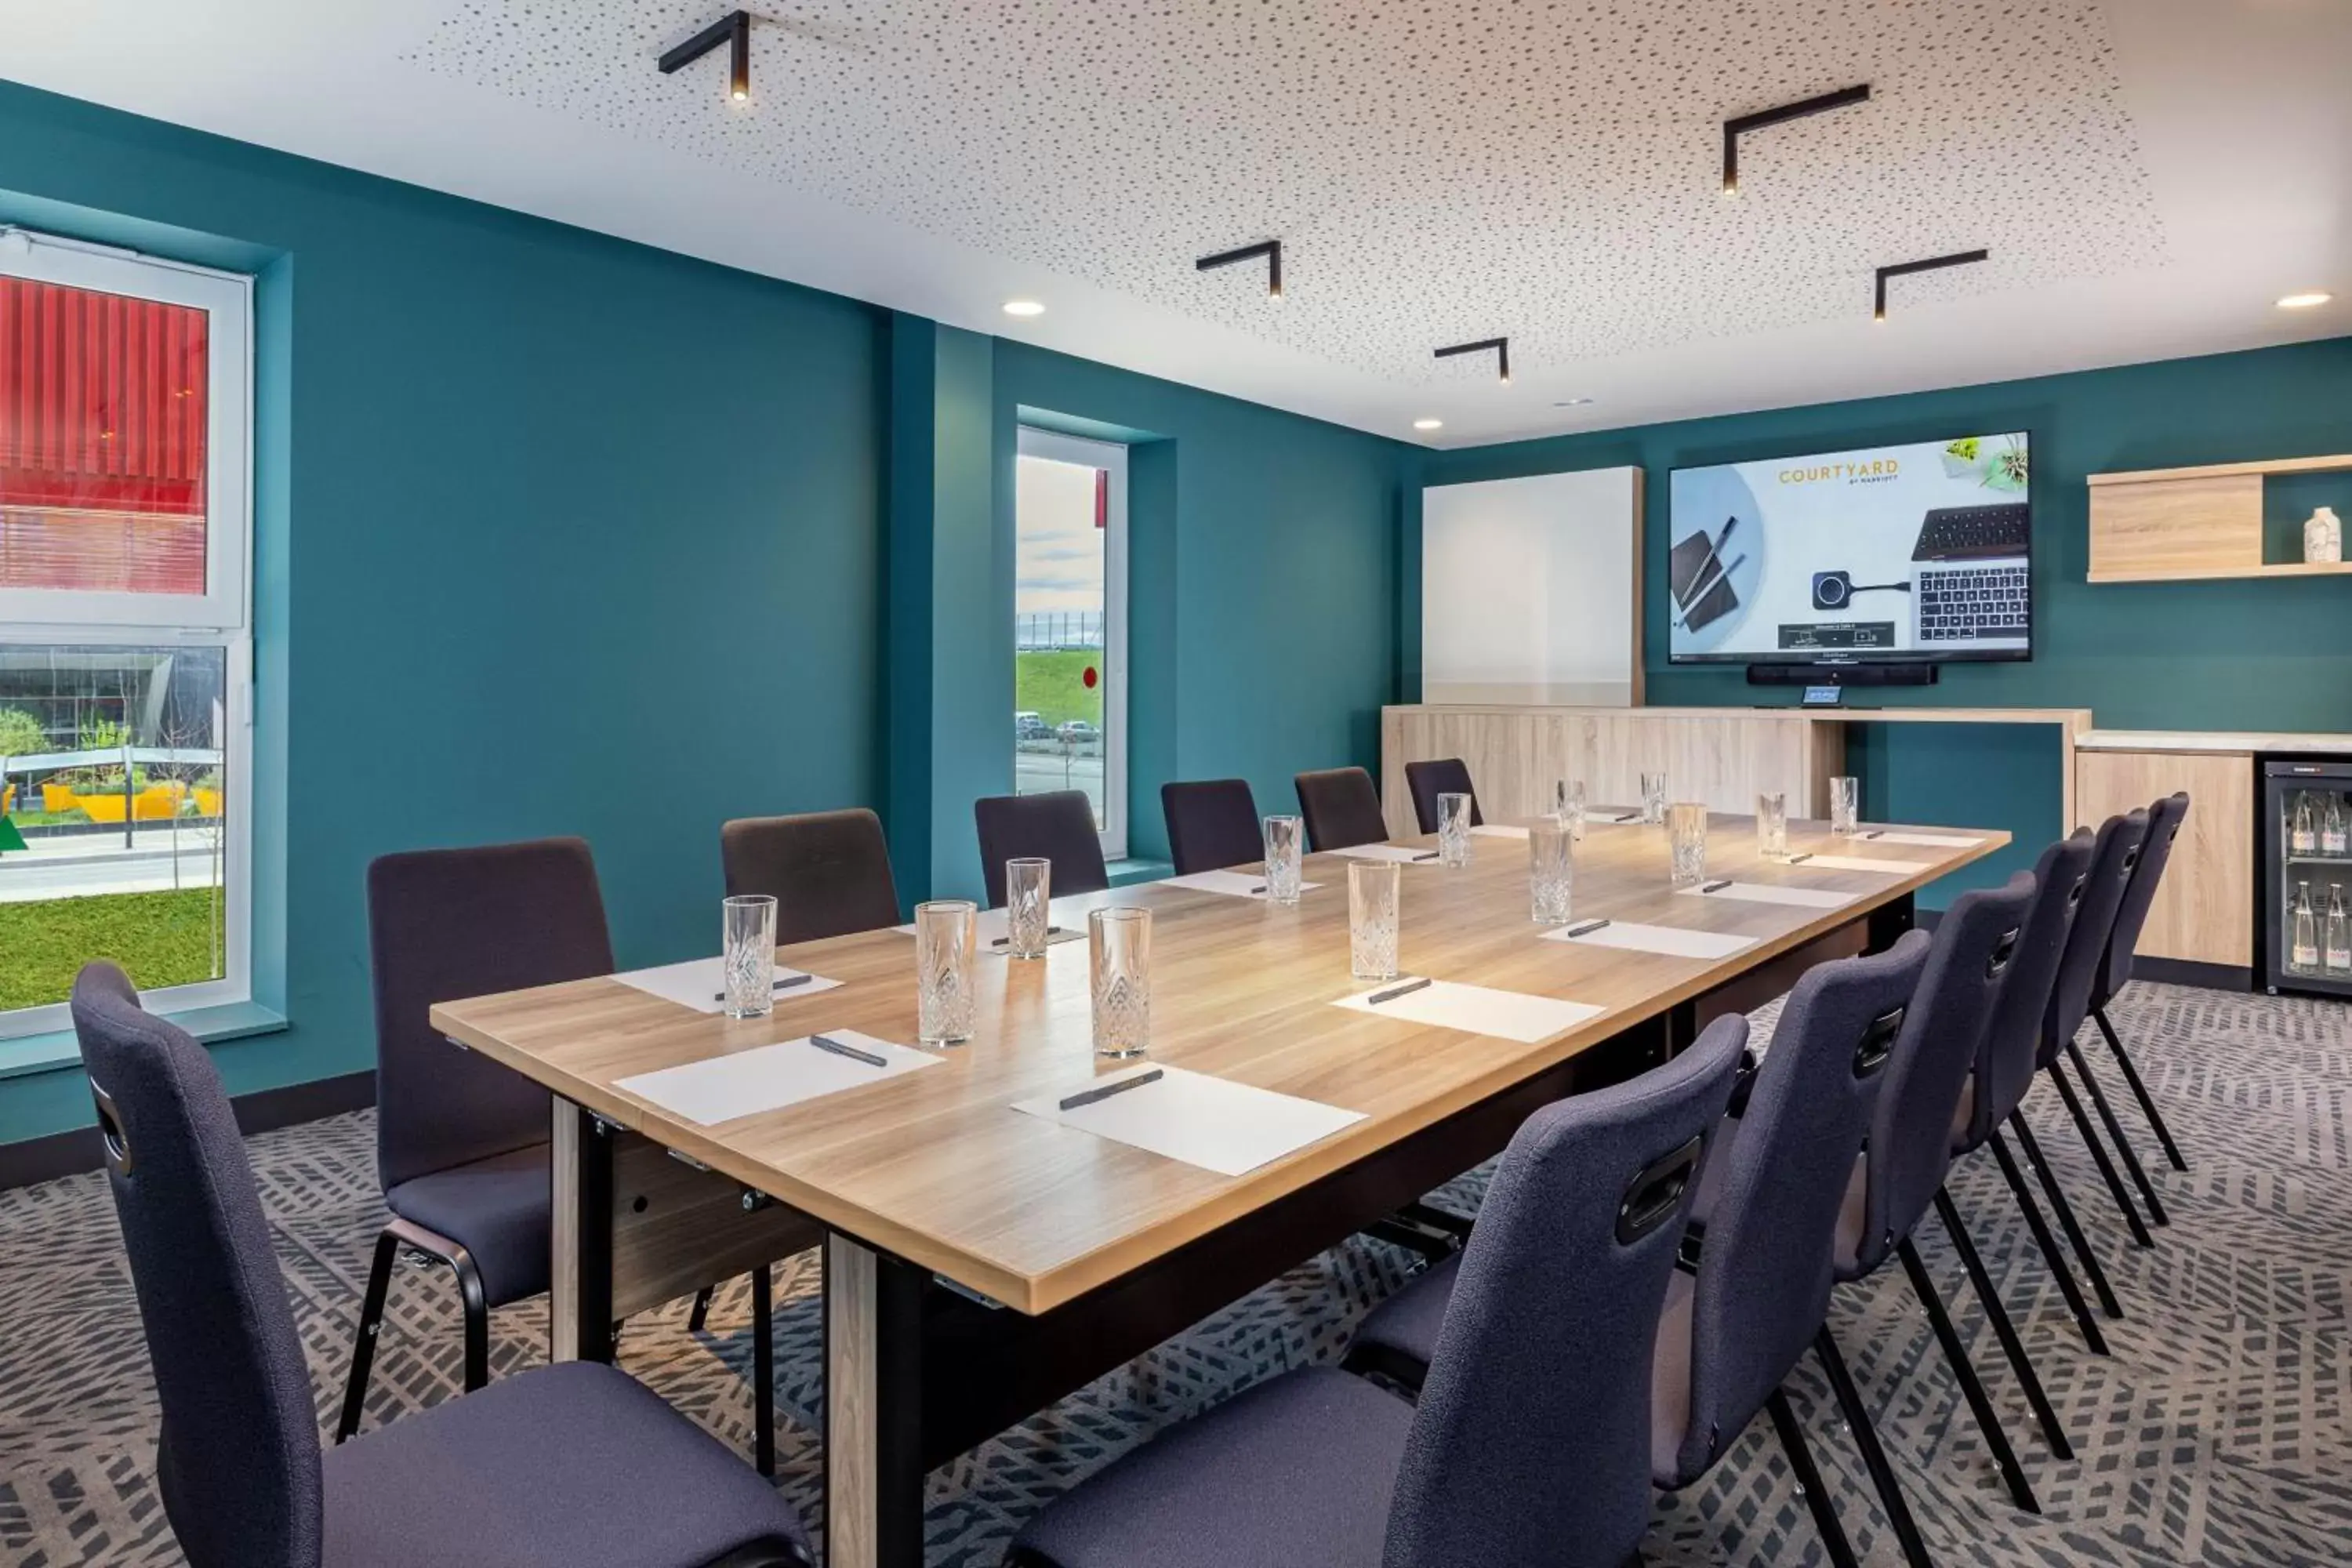 Meeting/conference room in Courtyard by Marriott Paris Charles de Gaulle Central Airport